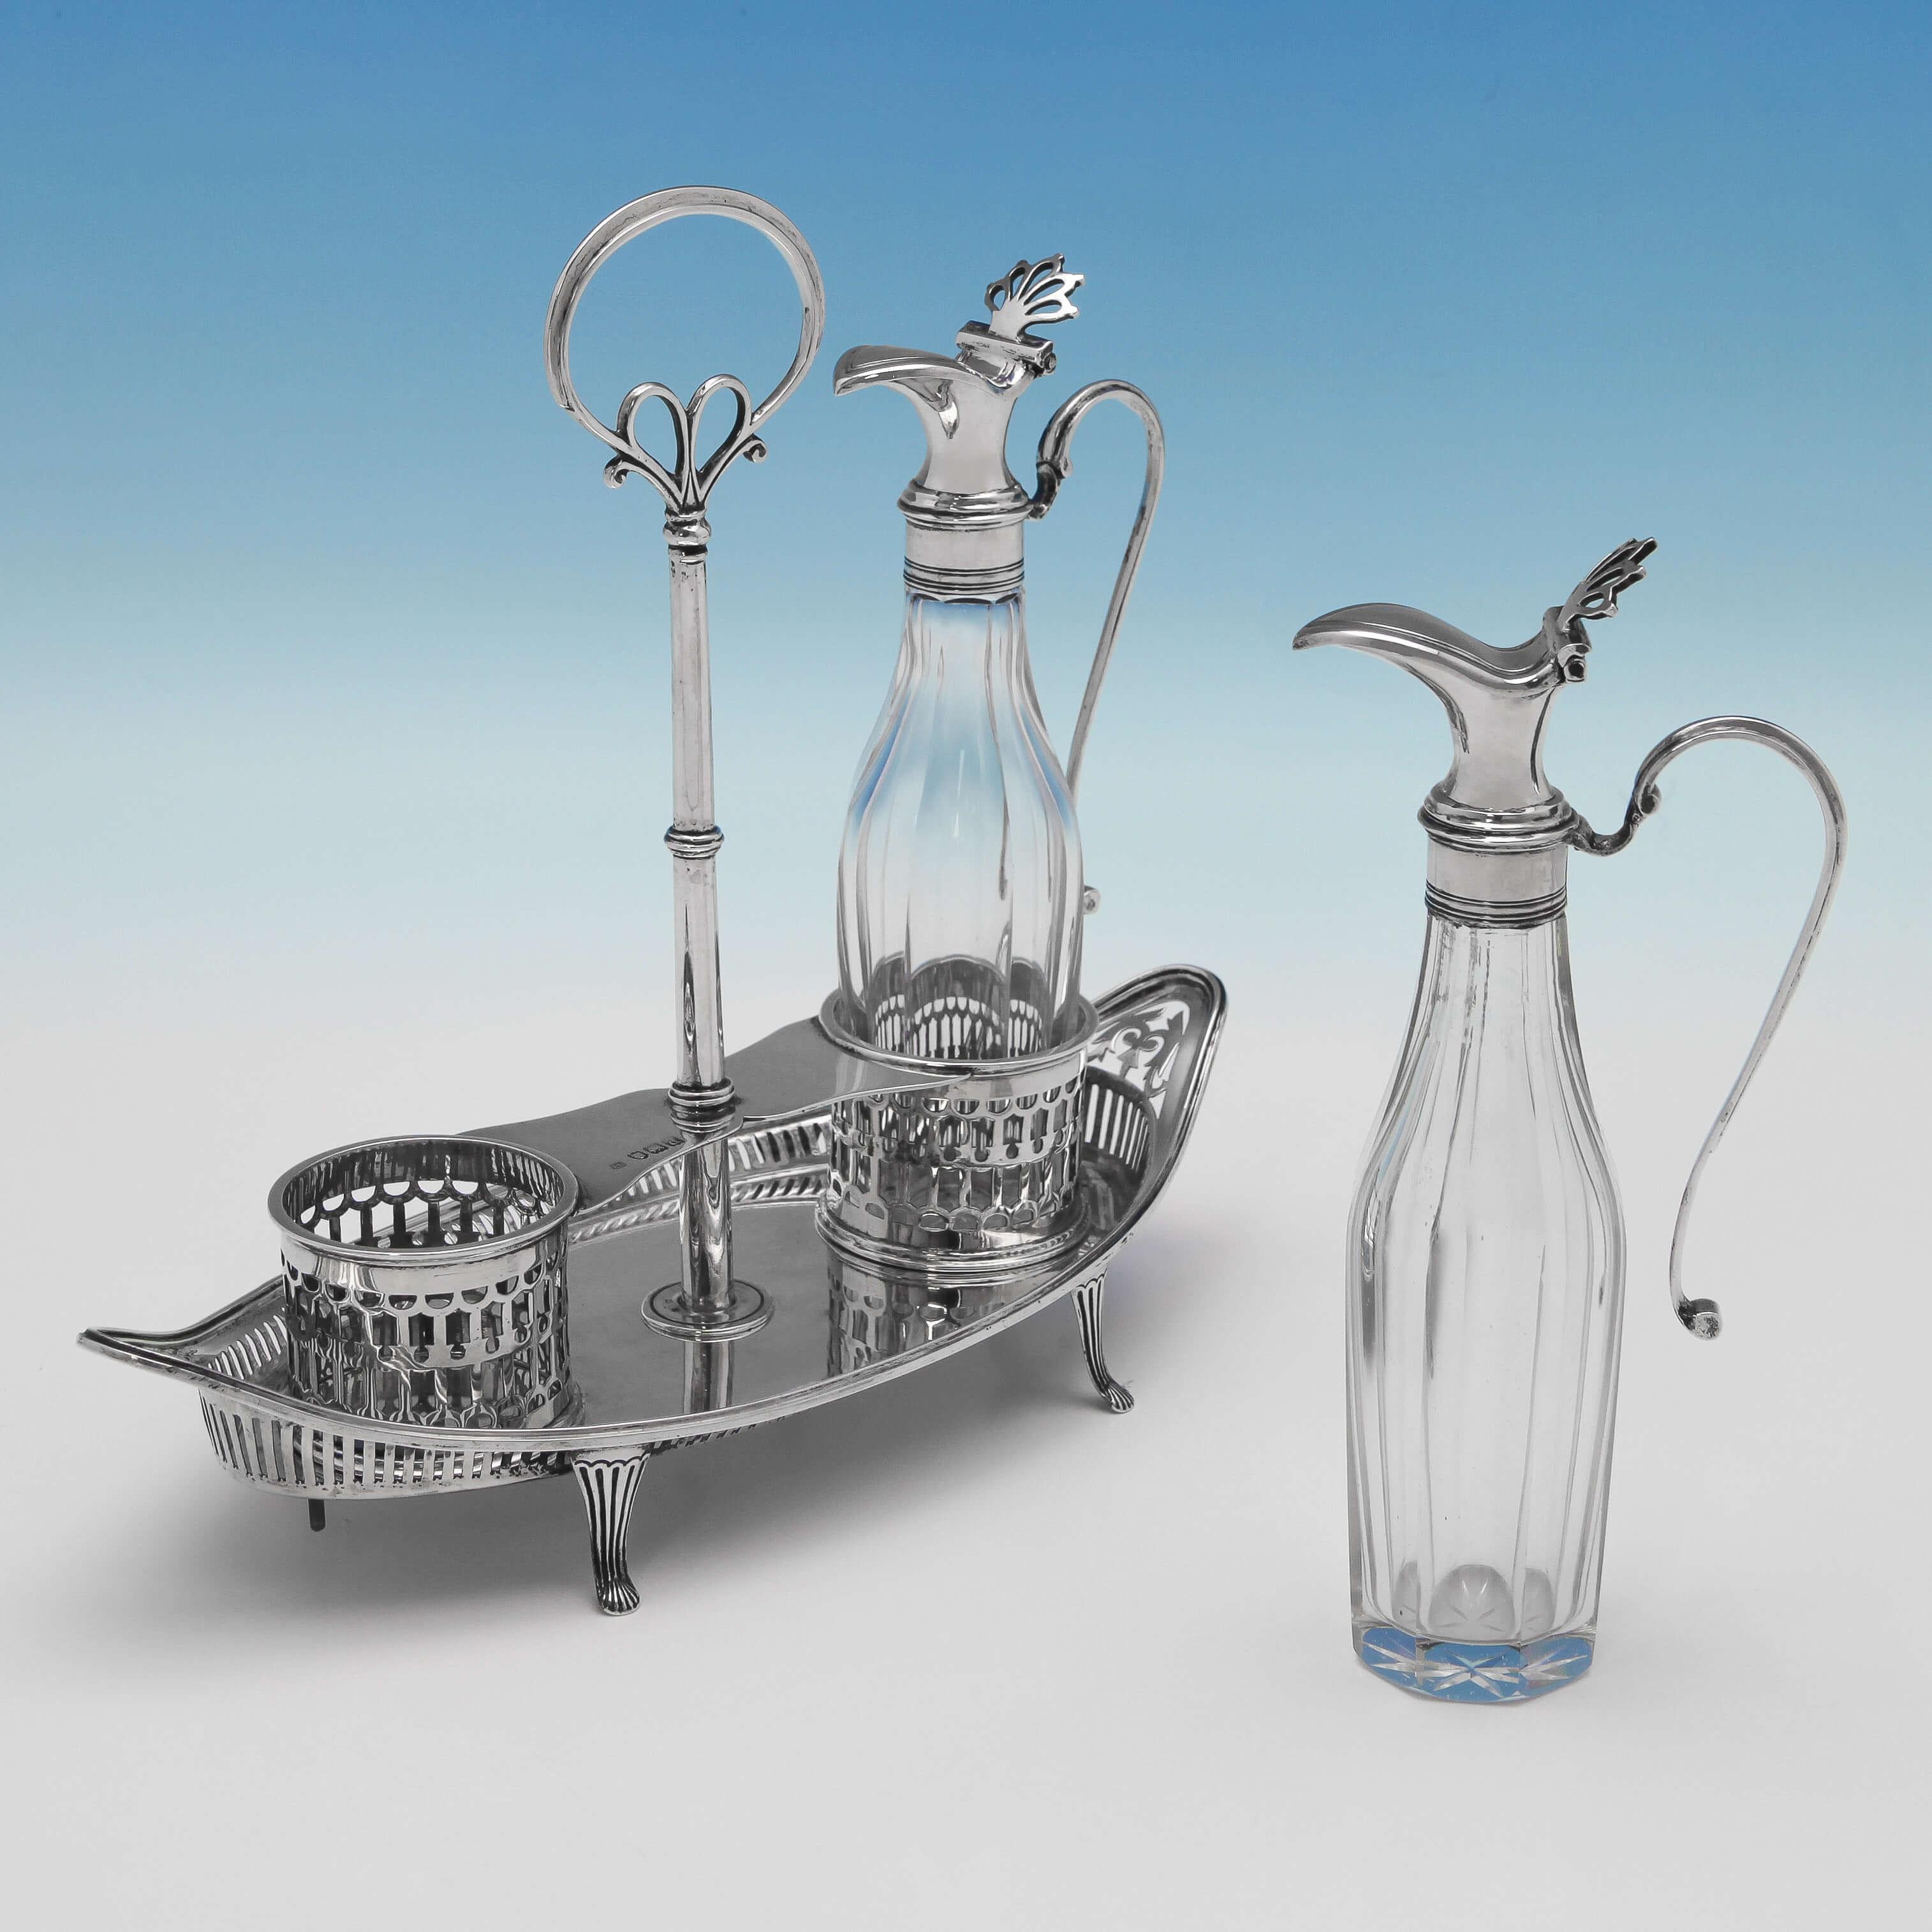 Hallmarked in London in 1899 by Thomas Bradbury & Sons, this stylish Antique, late Victorian, Sterling Silver Oil And Vinegar Set is in the George III style. The two panelled glass bottles with silver mounts and handles sit in a slat pierced oval